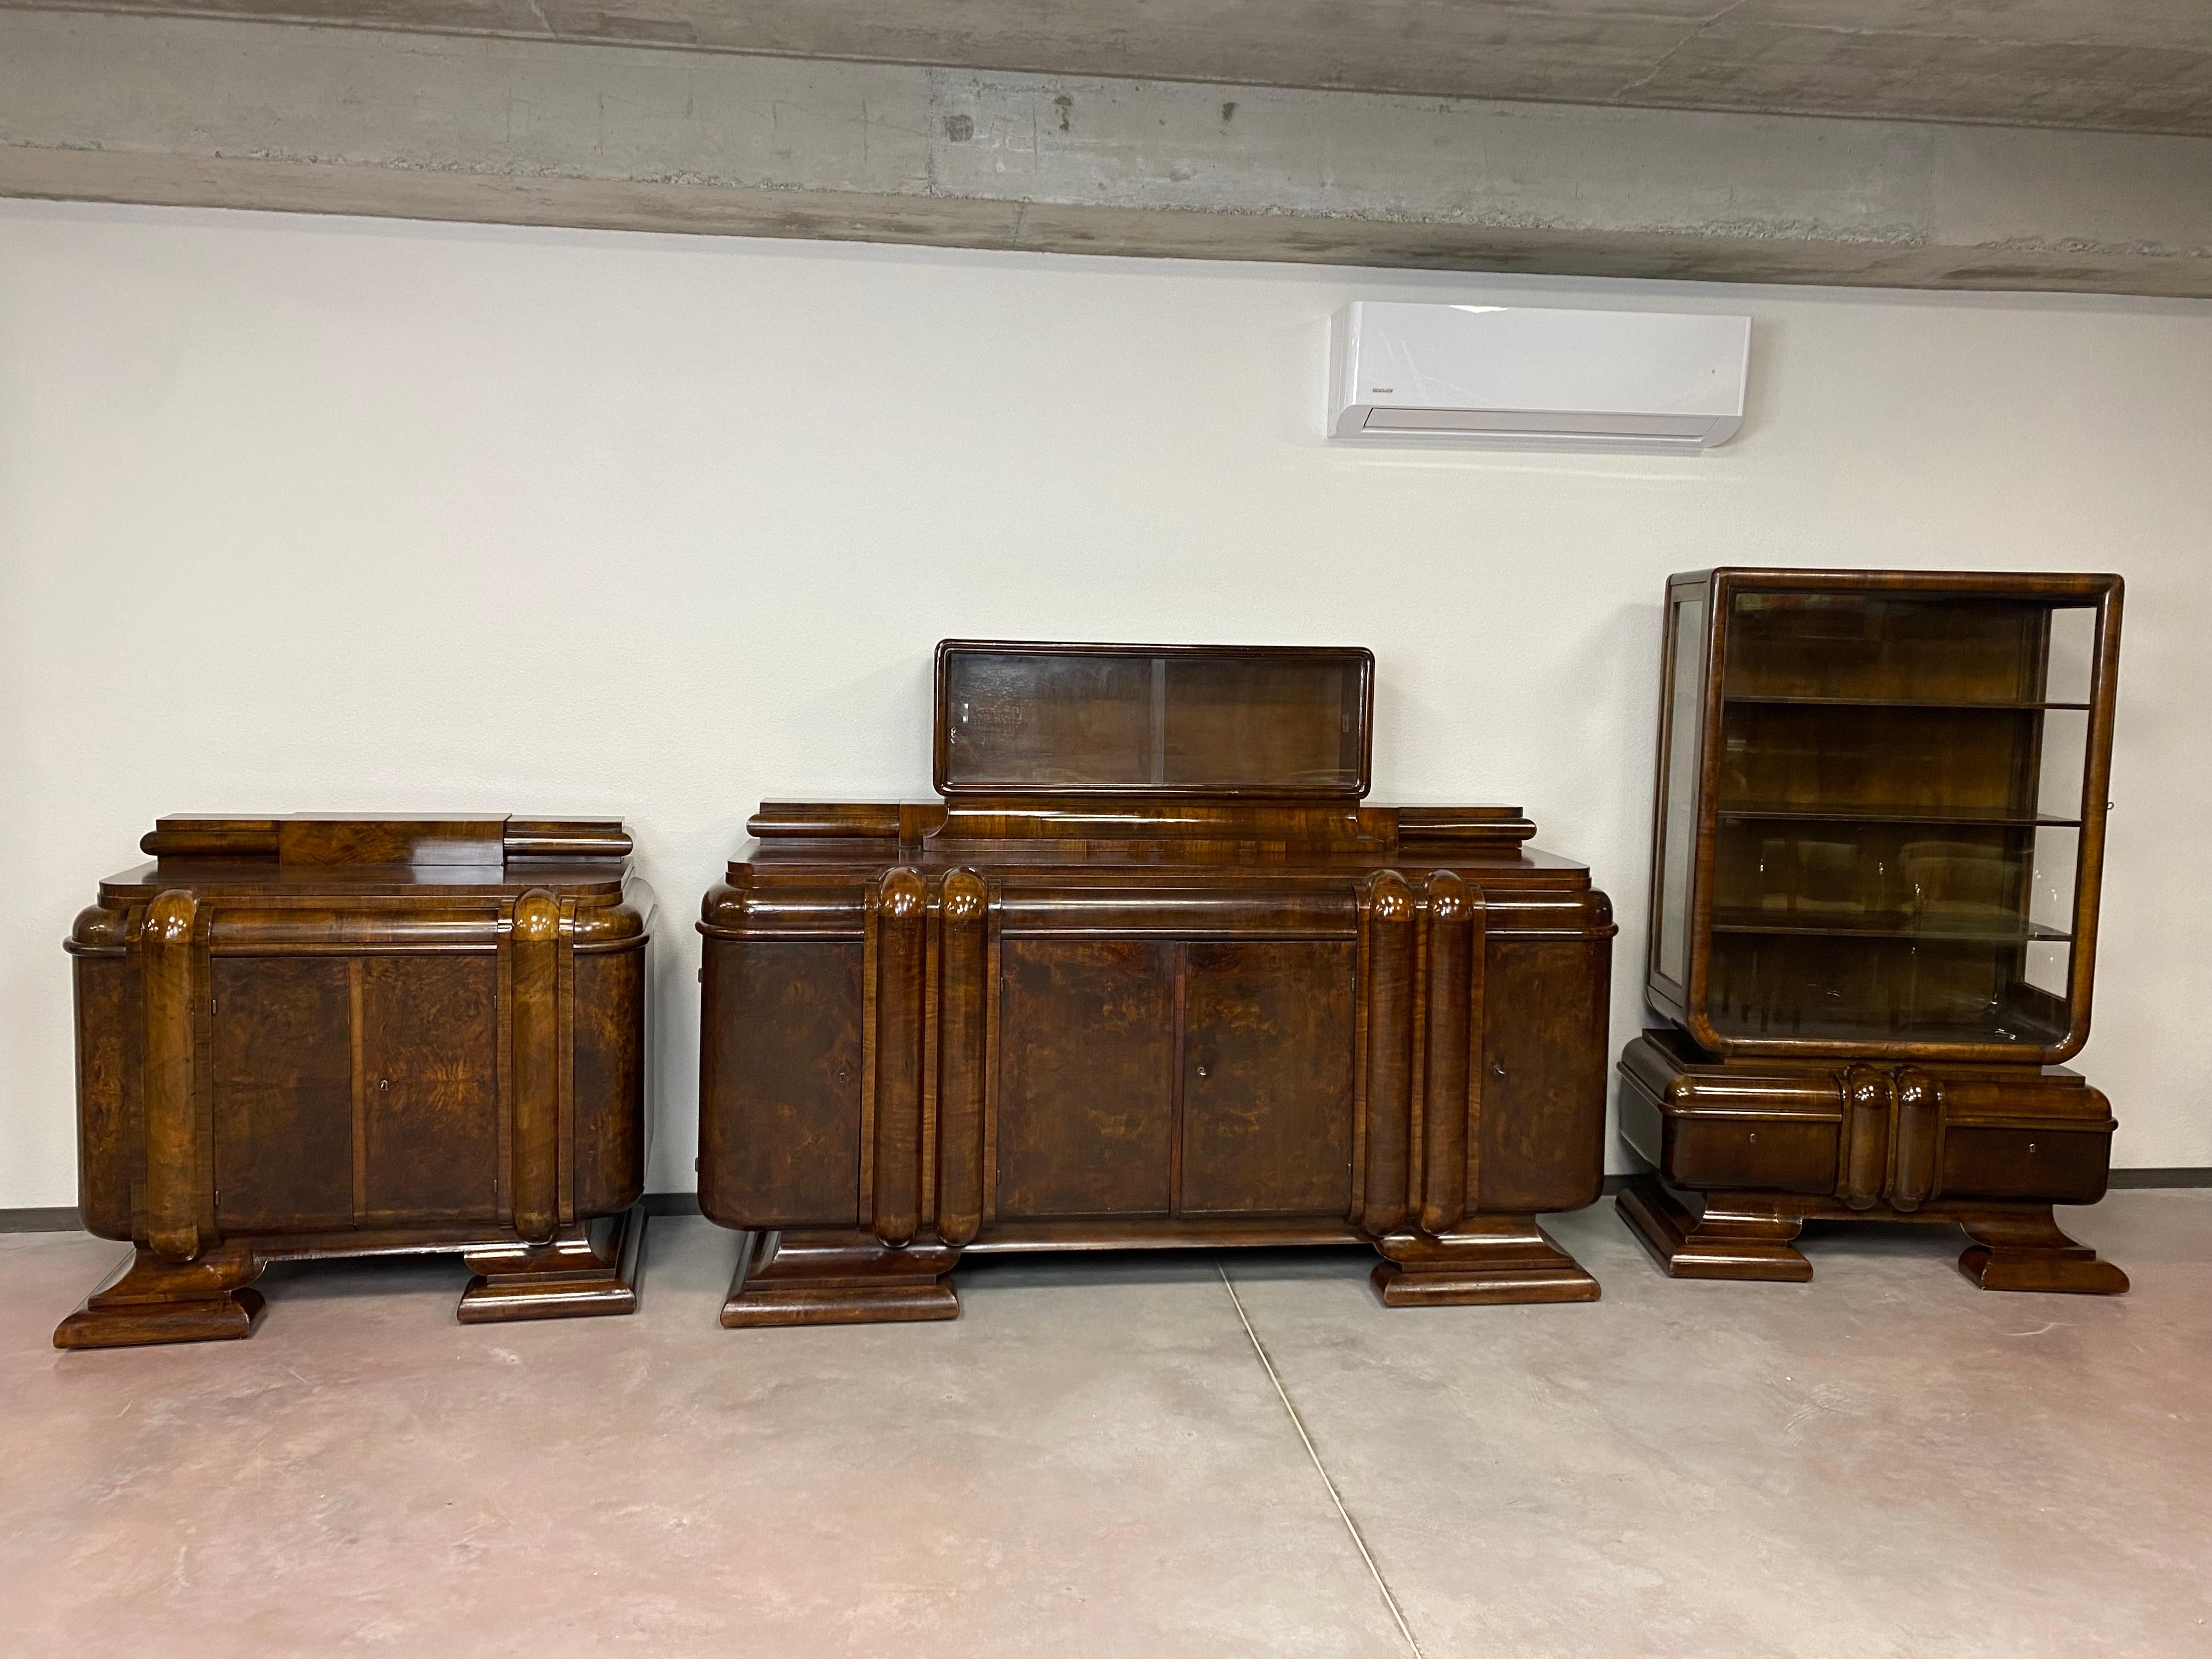 Art Deco dining room set consists of small cabinet 109x120x60cm, big cabinet 156x220x73cm and showcase 178x115x52cm.